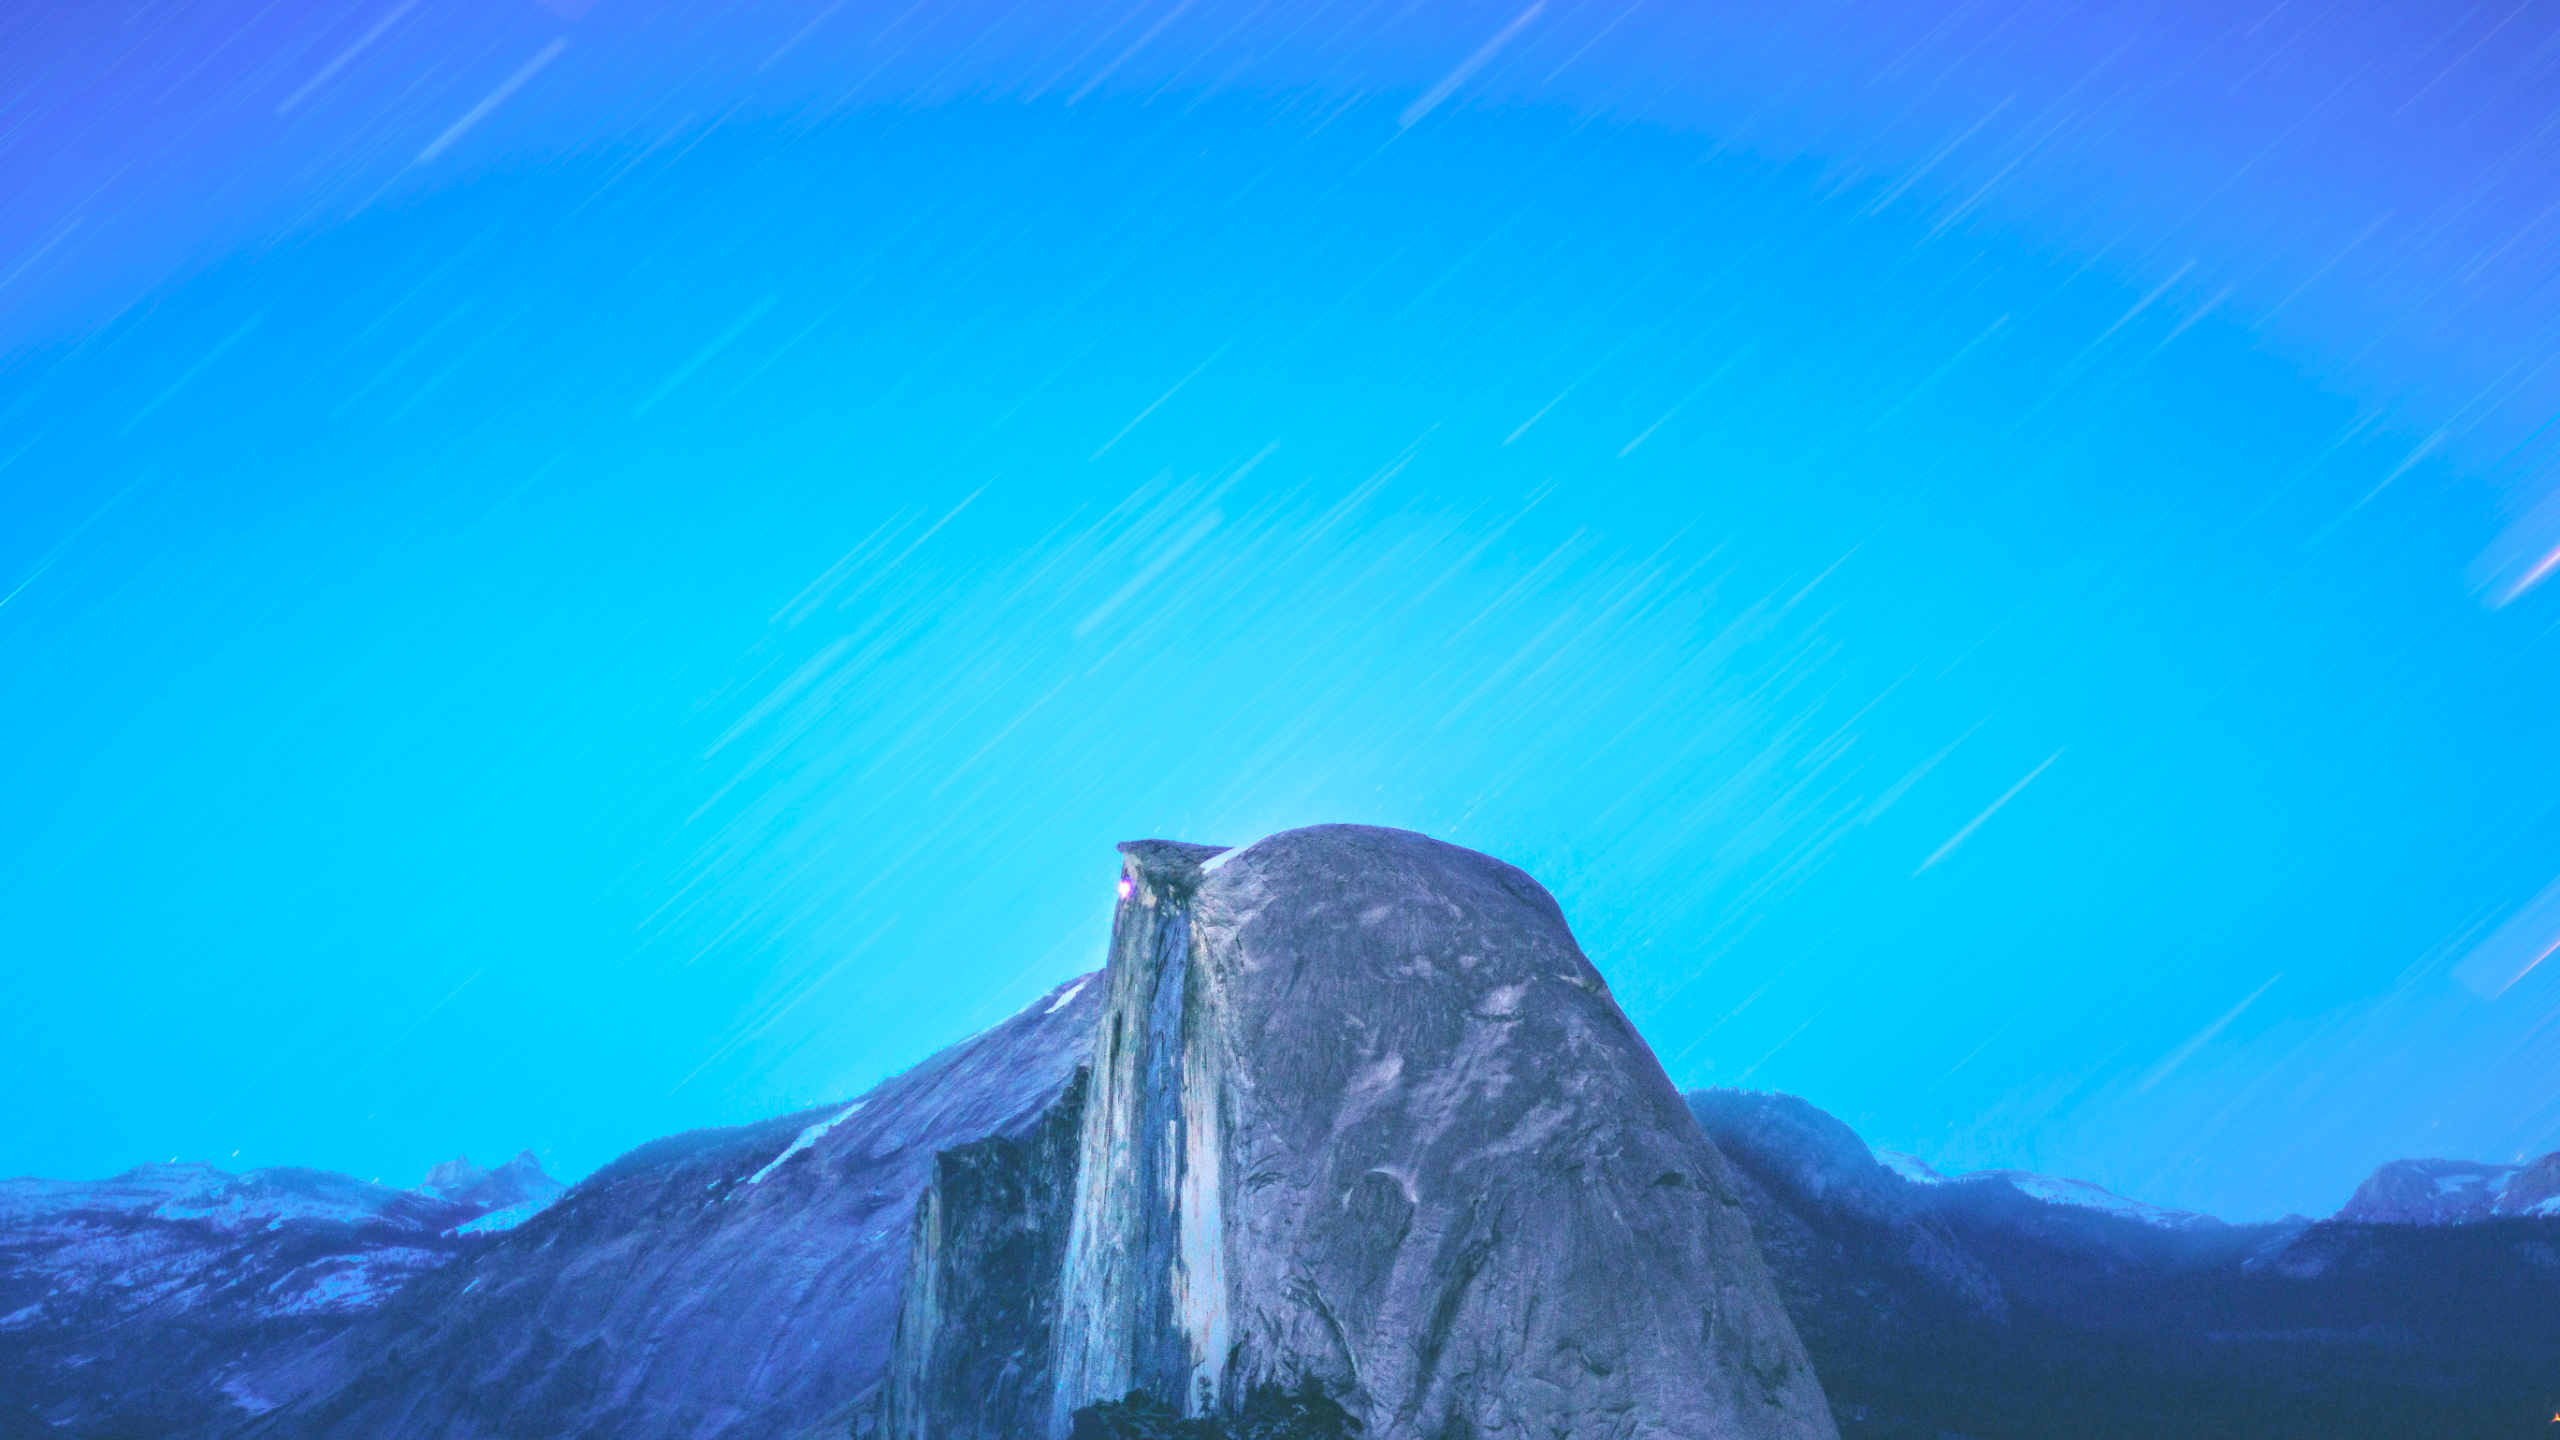 General 2560x1440 nature landscape mountains cliff night forest Yosemite National Park USA long exposure